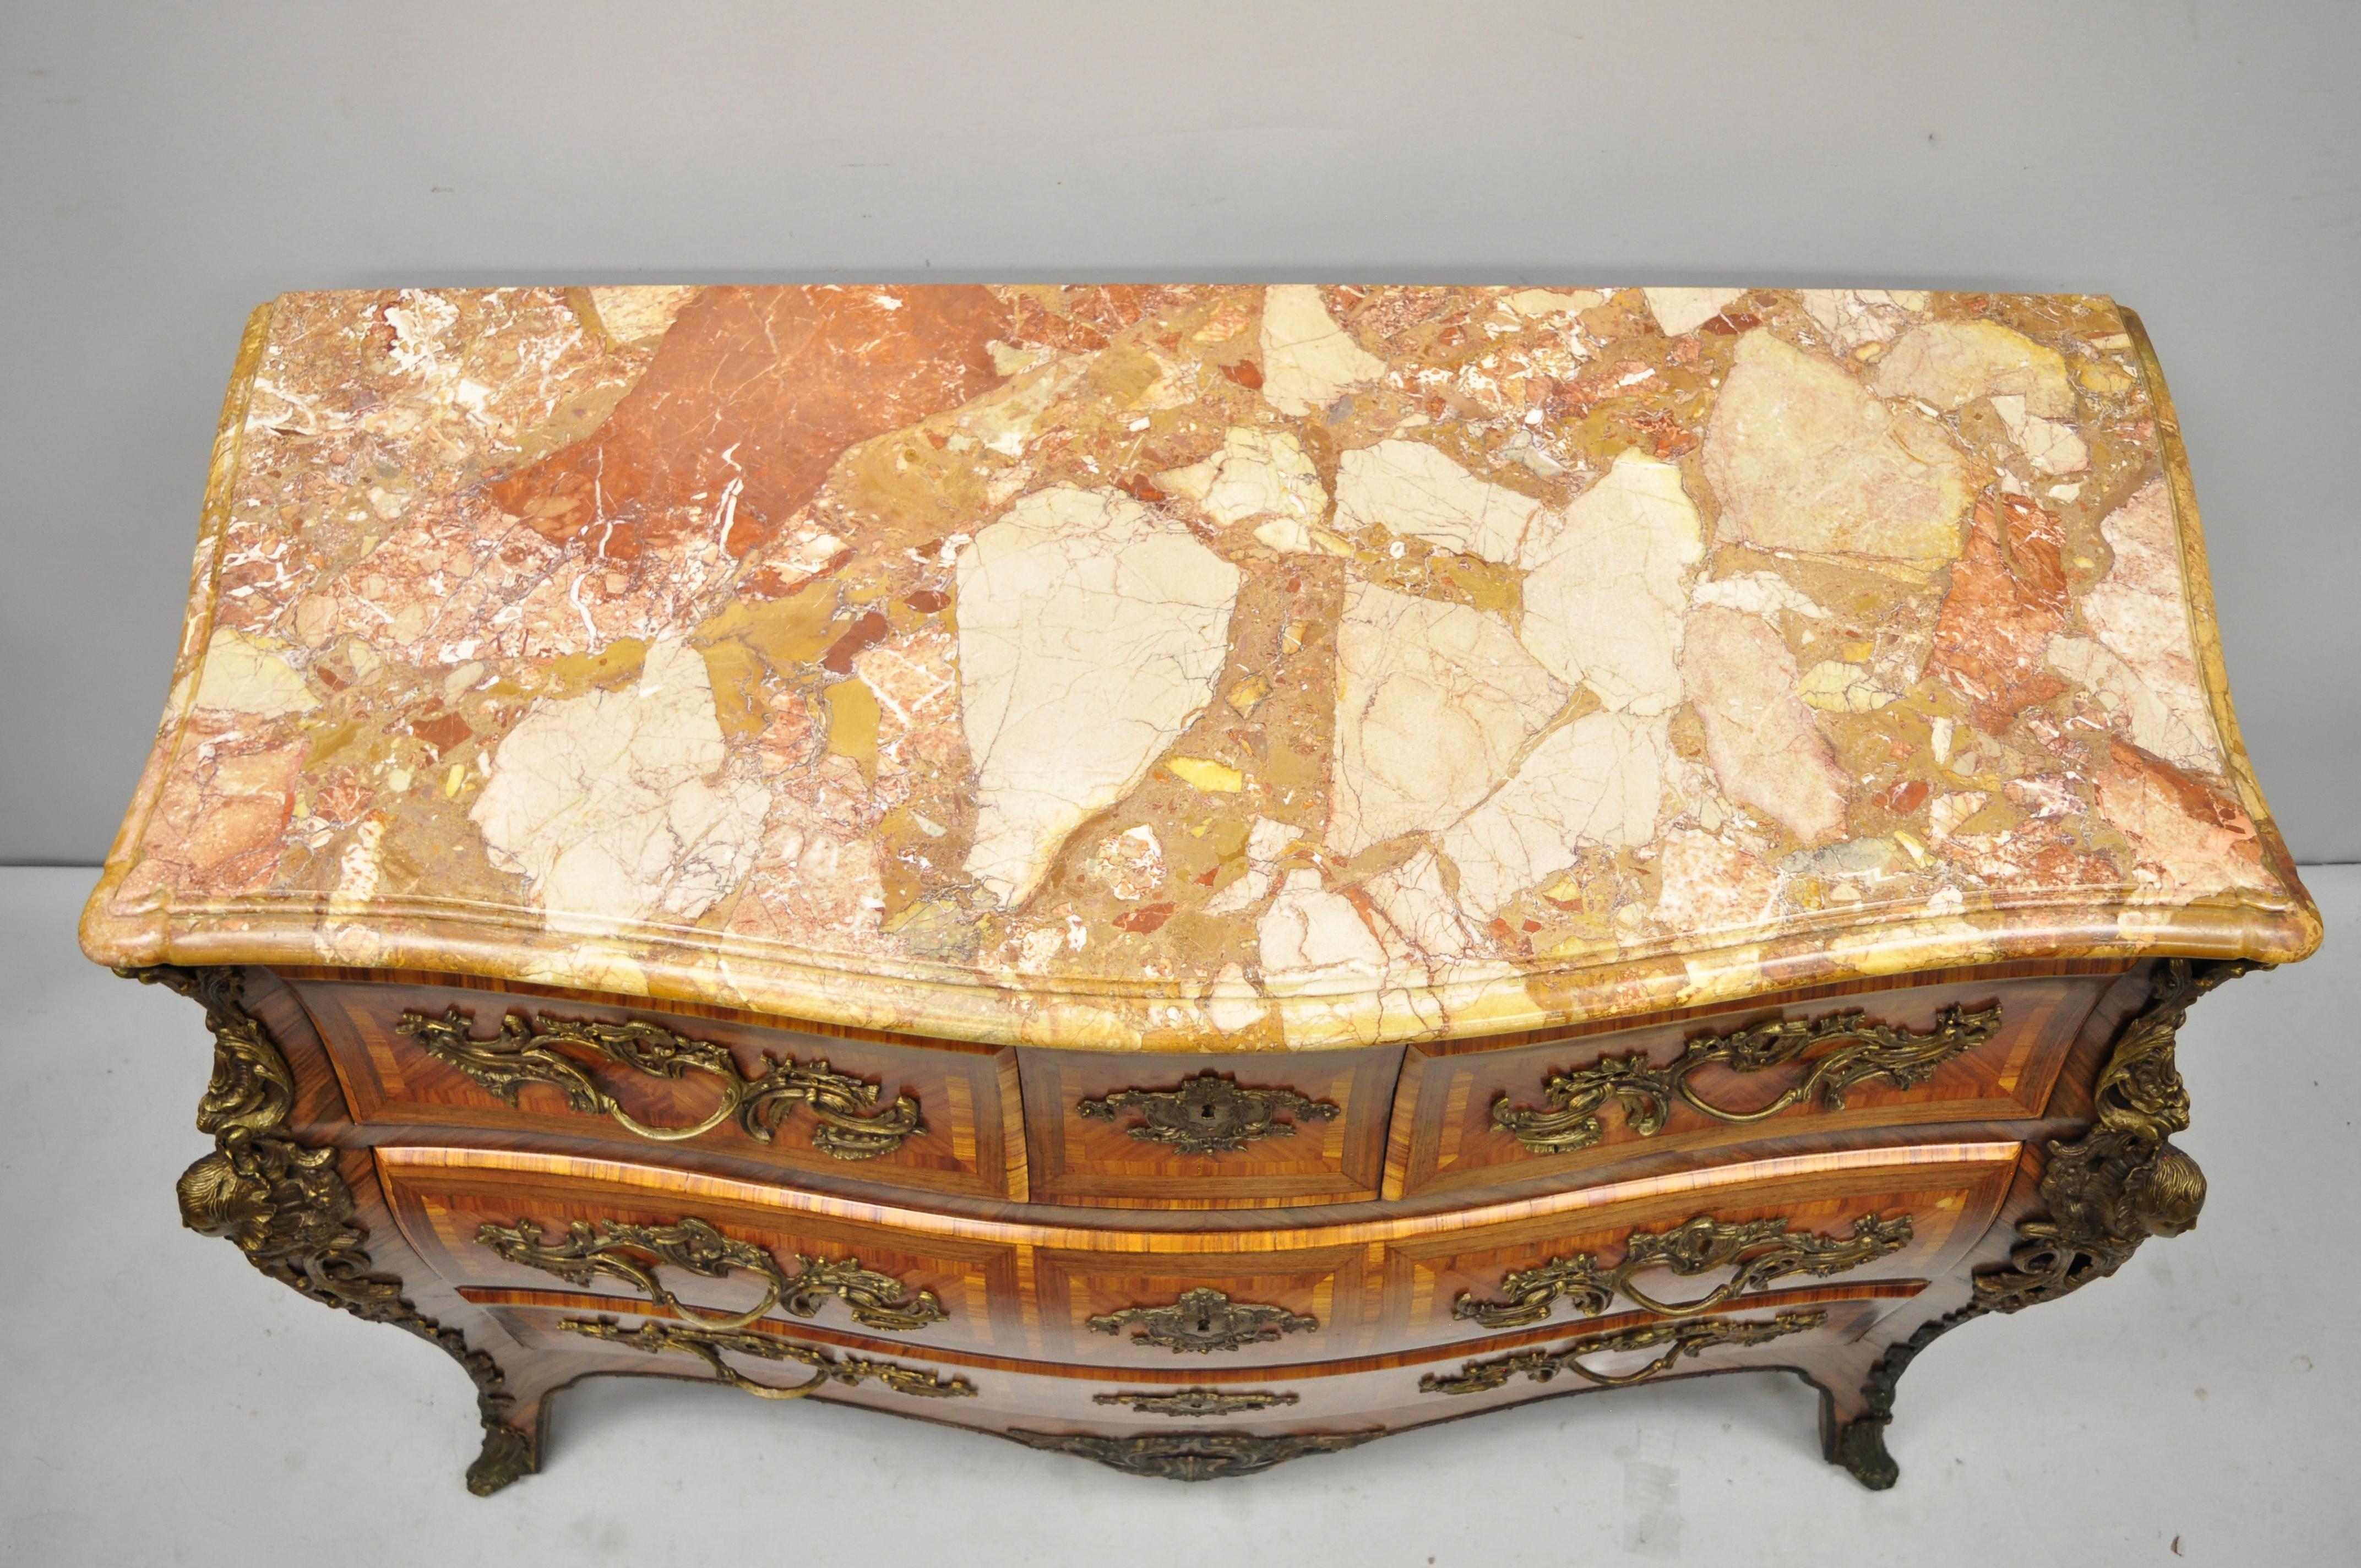 French Louis XV style inlaid marble-top bombe commode chest with bronze figures. Item features stunning marquetry inlay throughout, bronze hardware, bronze male and female faces, shaped rogue marble top with beveled edges, working lock and key, 5